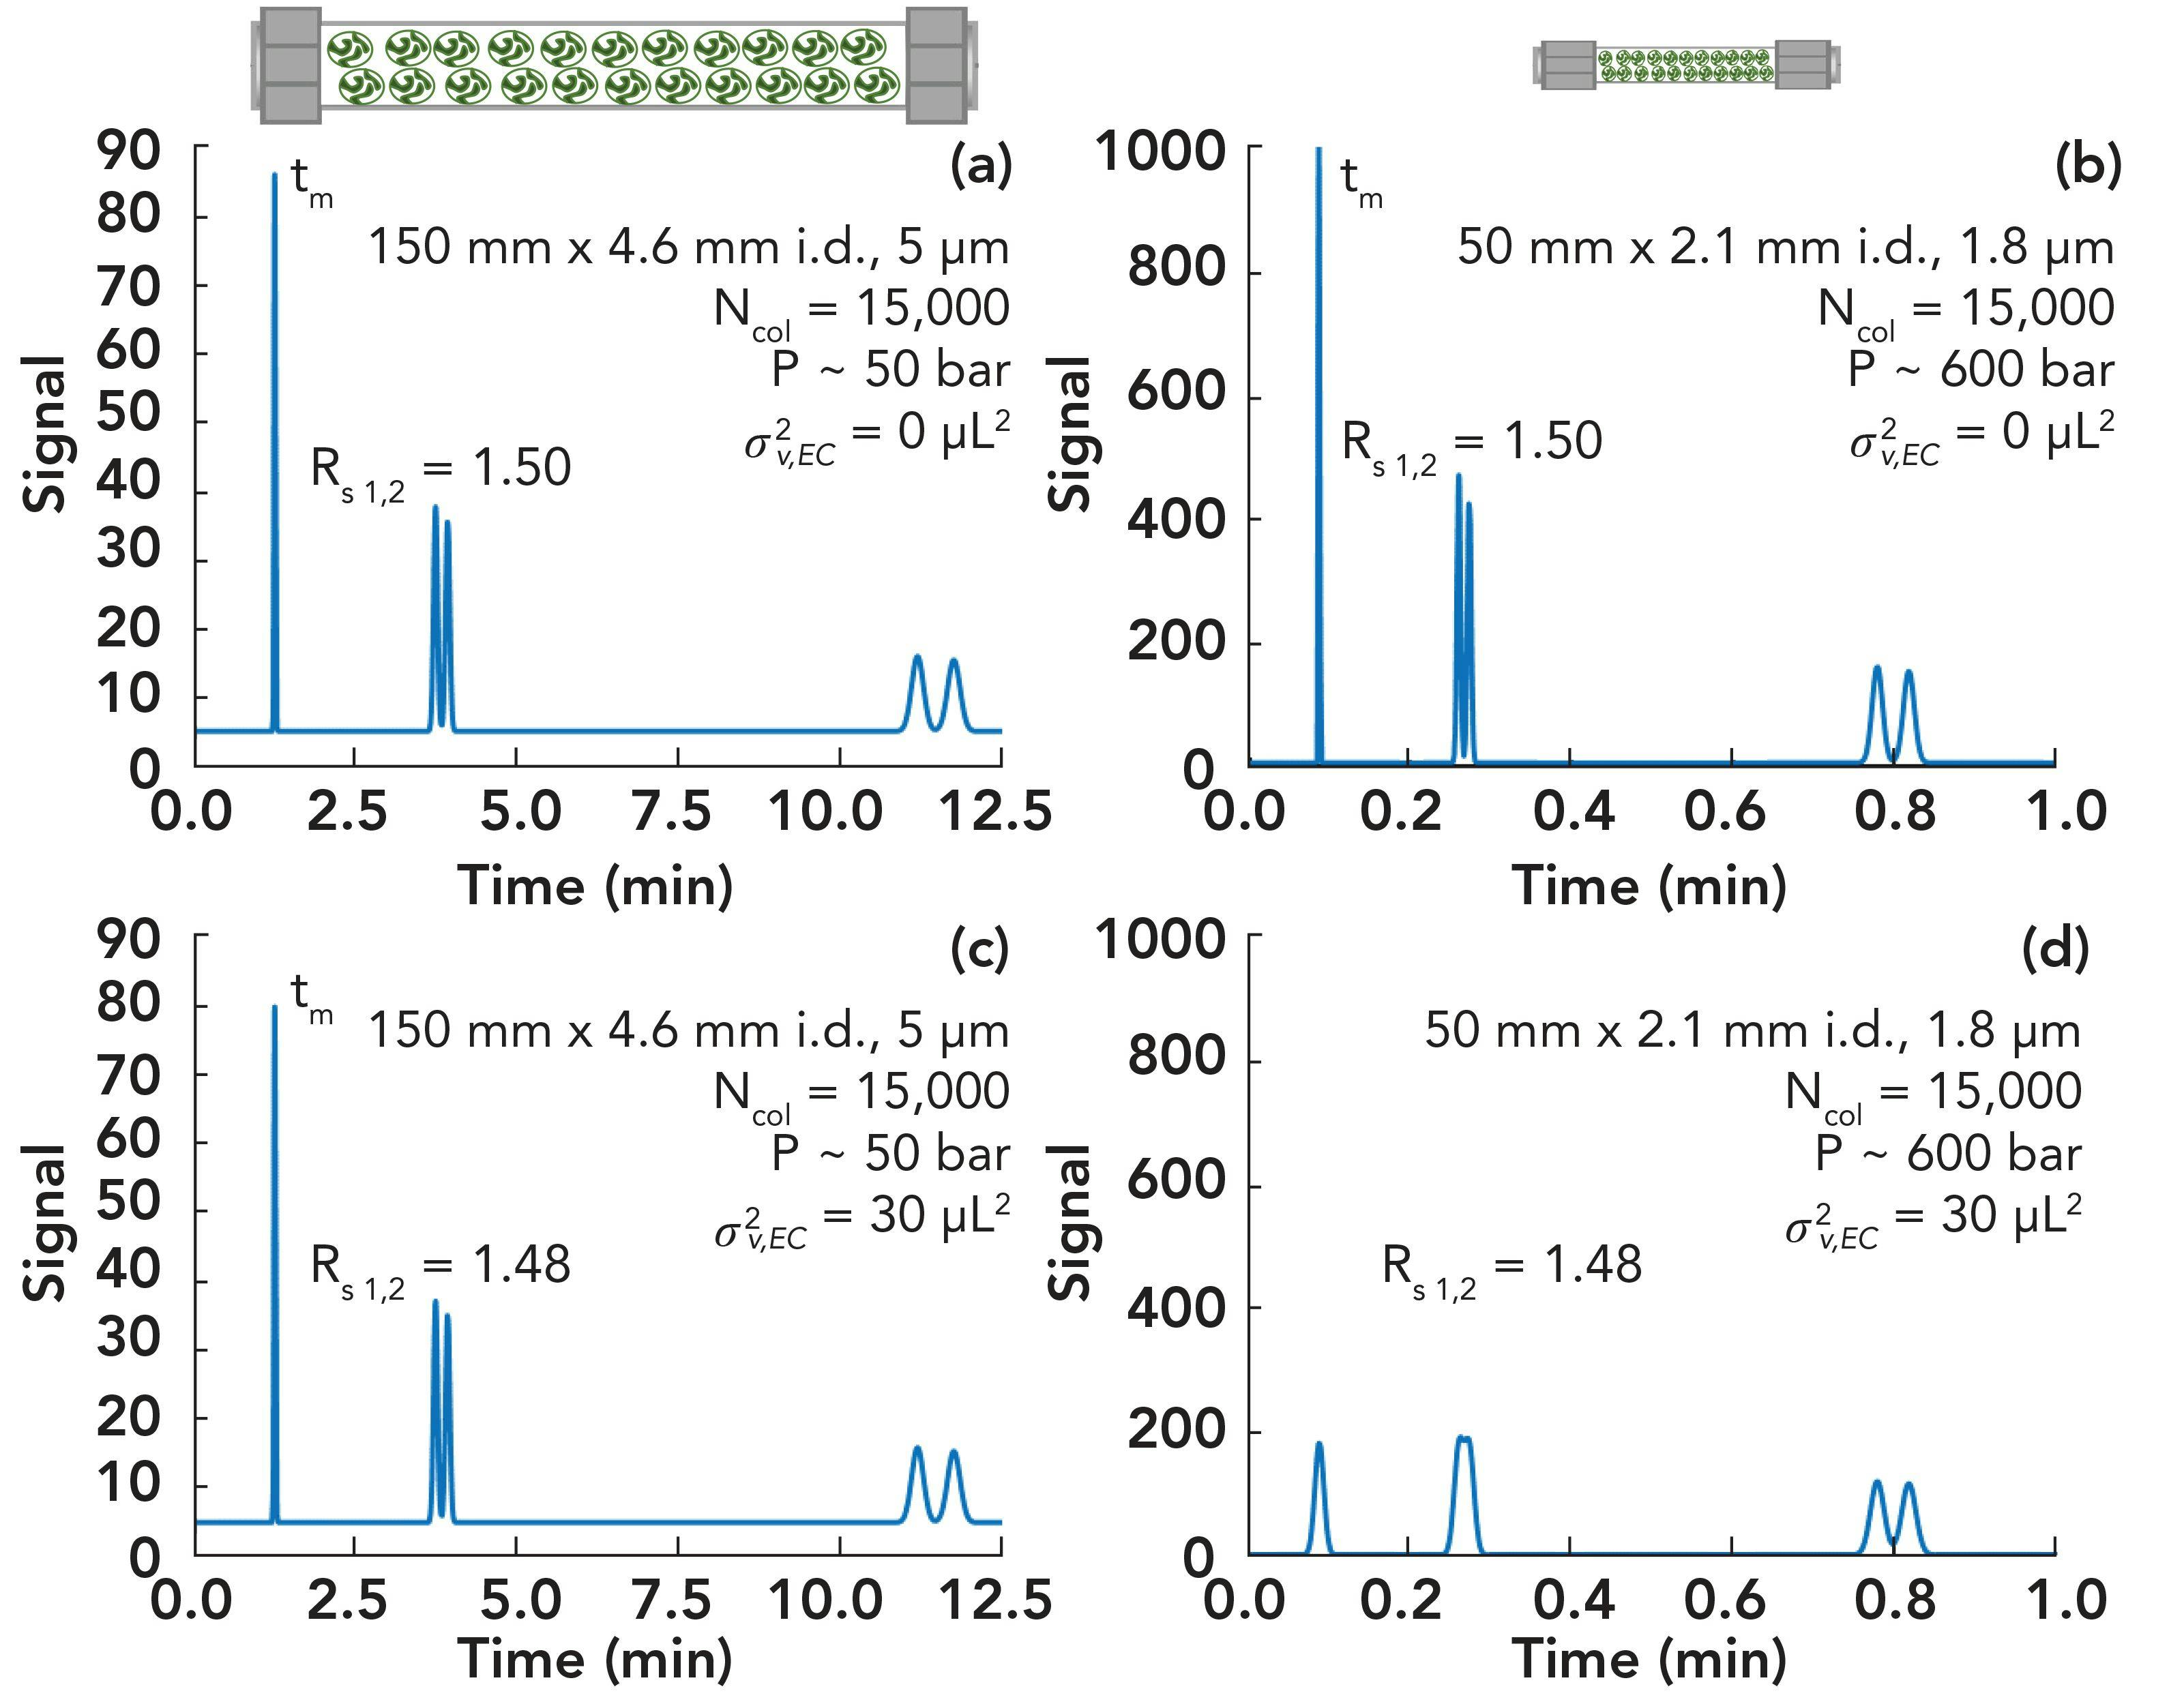 FIGURE 1: Comparison of the effect of extra-column dispersion on resolution for separations (a) through (d) using (a) and (c) “large” or (b) and (d) “small” columns. Assumptions: Total column porosity, 0.5; Flow rate, 1.0 mL/min.; Plate heights, 10 μm (150 mm column) and 3.3 μm (50 mm column); k values, 1) 2.00, 2) 2.15, 3) 8.00, 4) 8.45. The elution time of an unretained compound is indicate by tm.